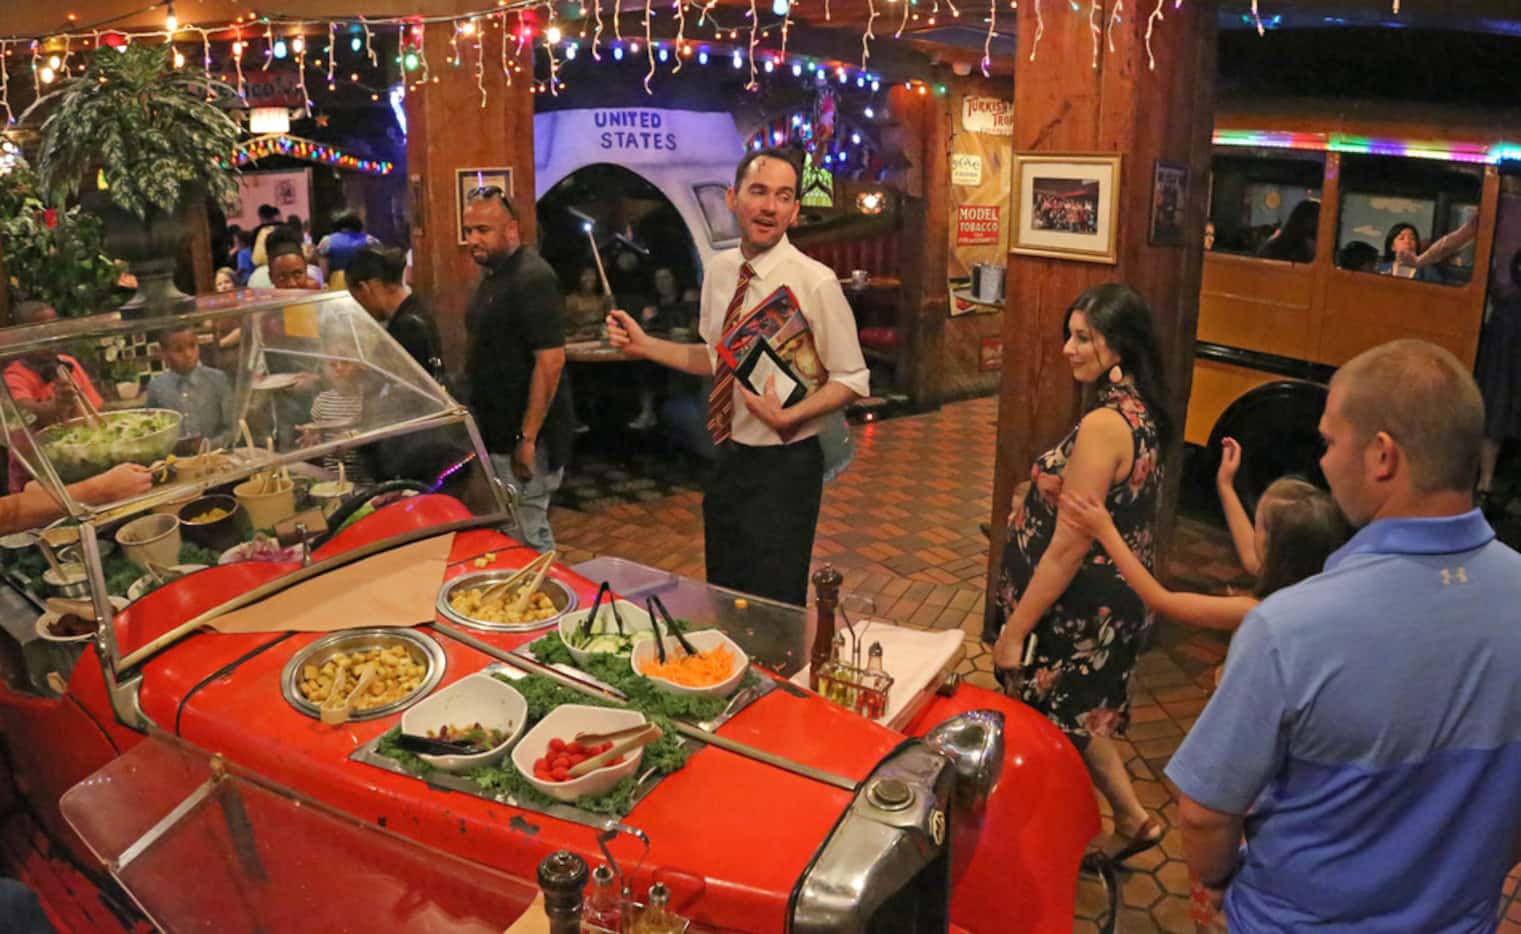 An antique car serves as a unique salad bar at the Magic Time Machine on Beltline Road in...